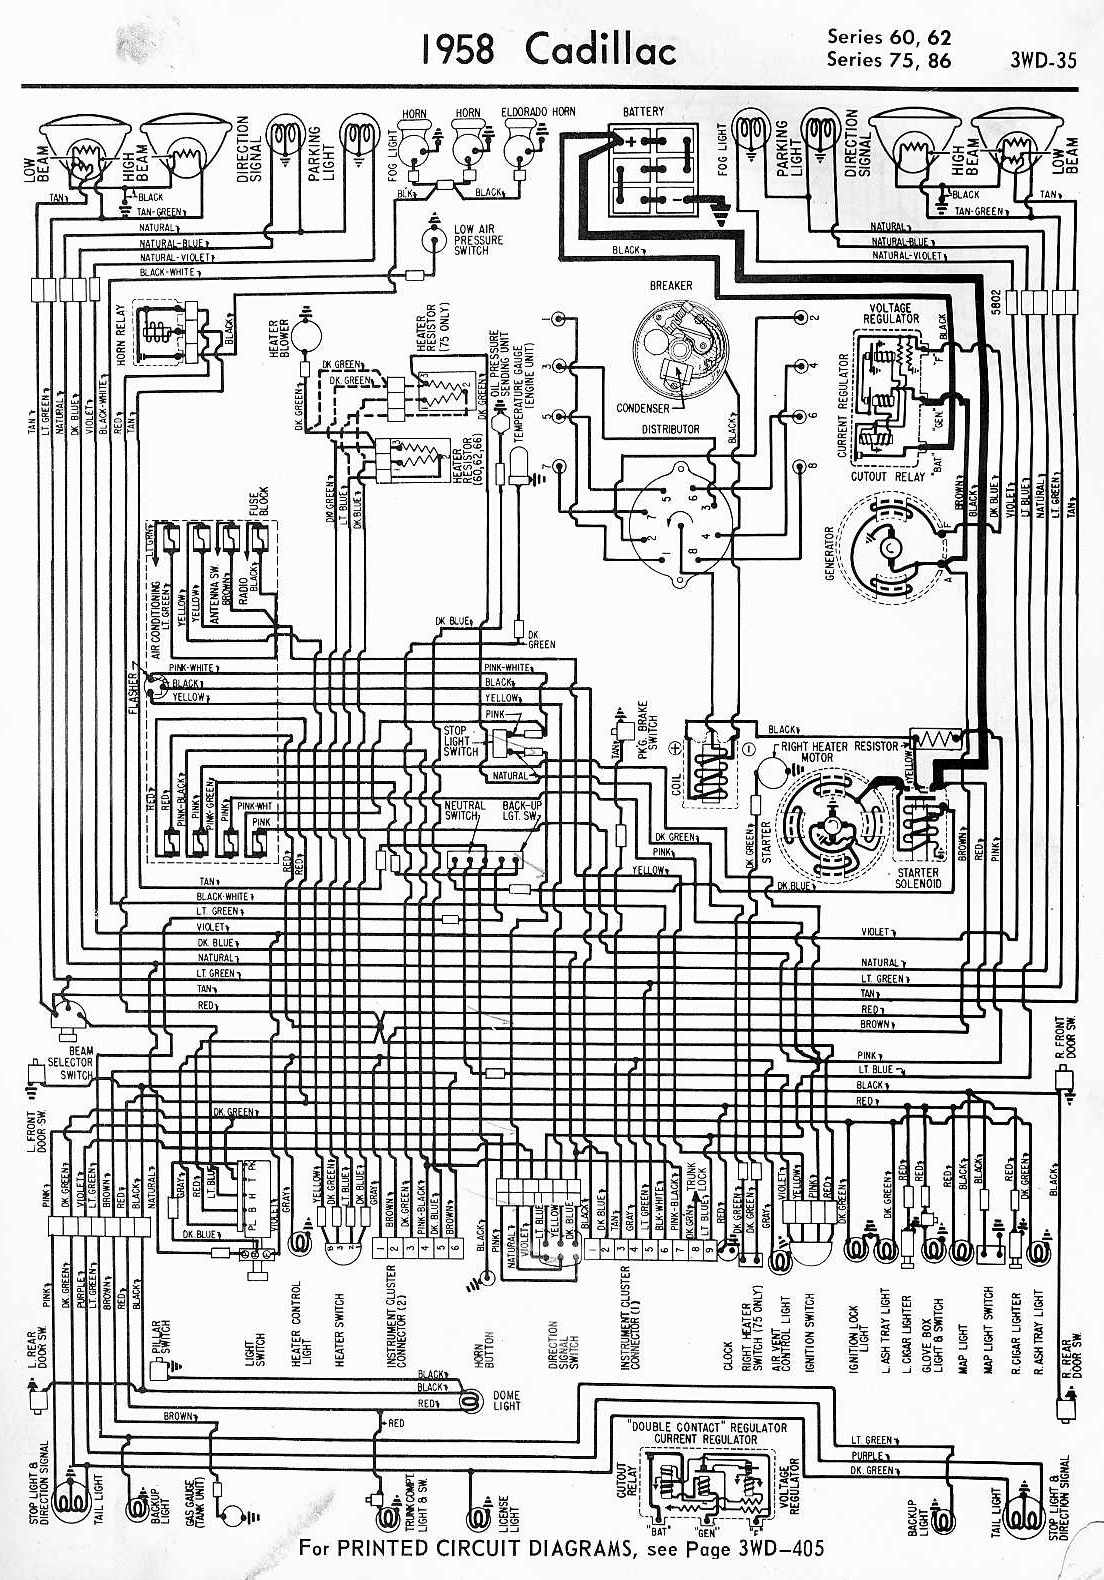 Engine Wiring Schematic 93 Cadillac 4.9 Engine from www.automotive-manuals.net